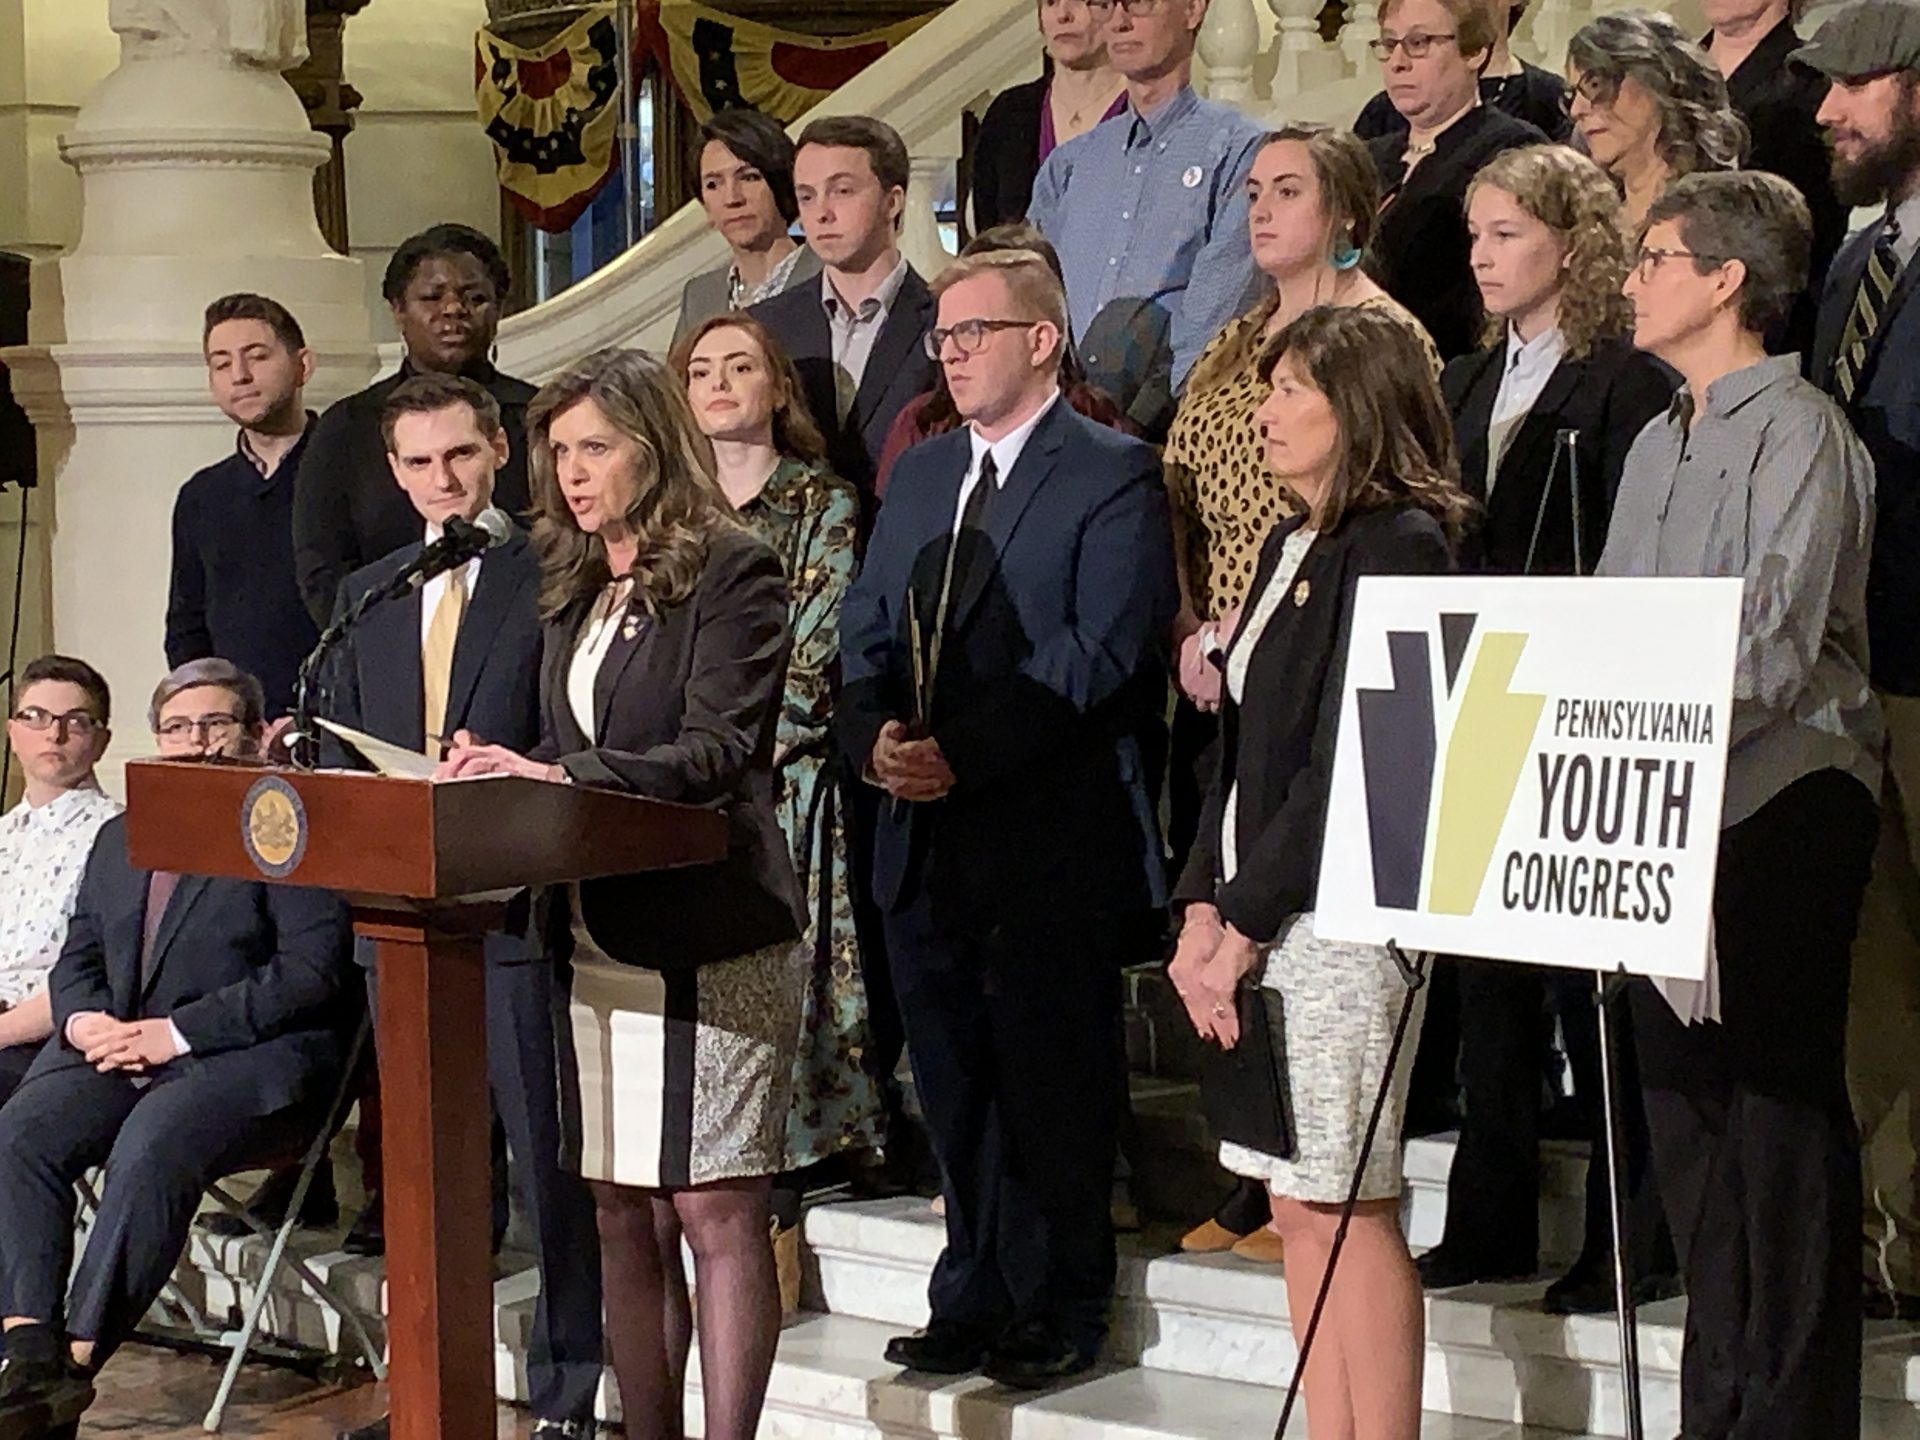 Senate Labor & Industry Committee Chairwoman Camera Bartolotta, R-Washington County, said at a Pennsylvania Youth Congress news conference it's time the state provide nondiscrimination protections to LGBTQ people particularly when it comes to employment.